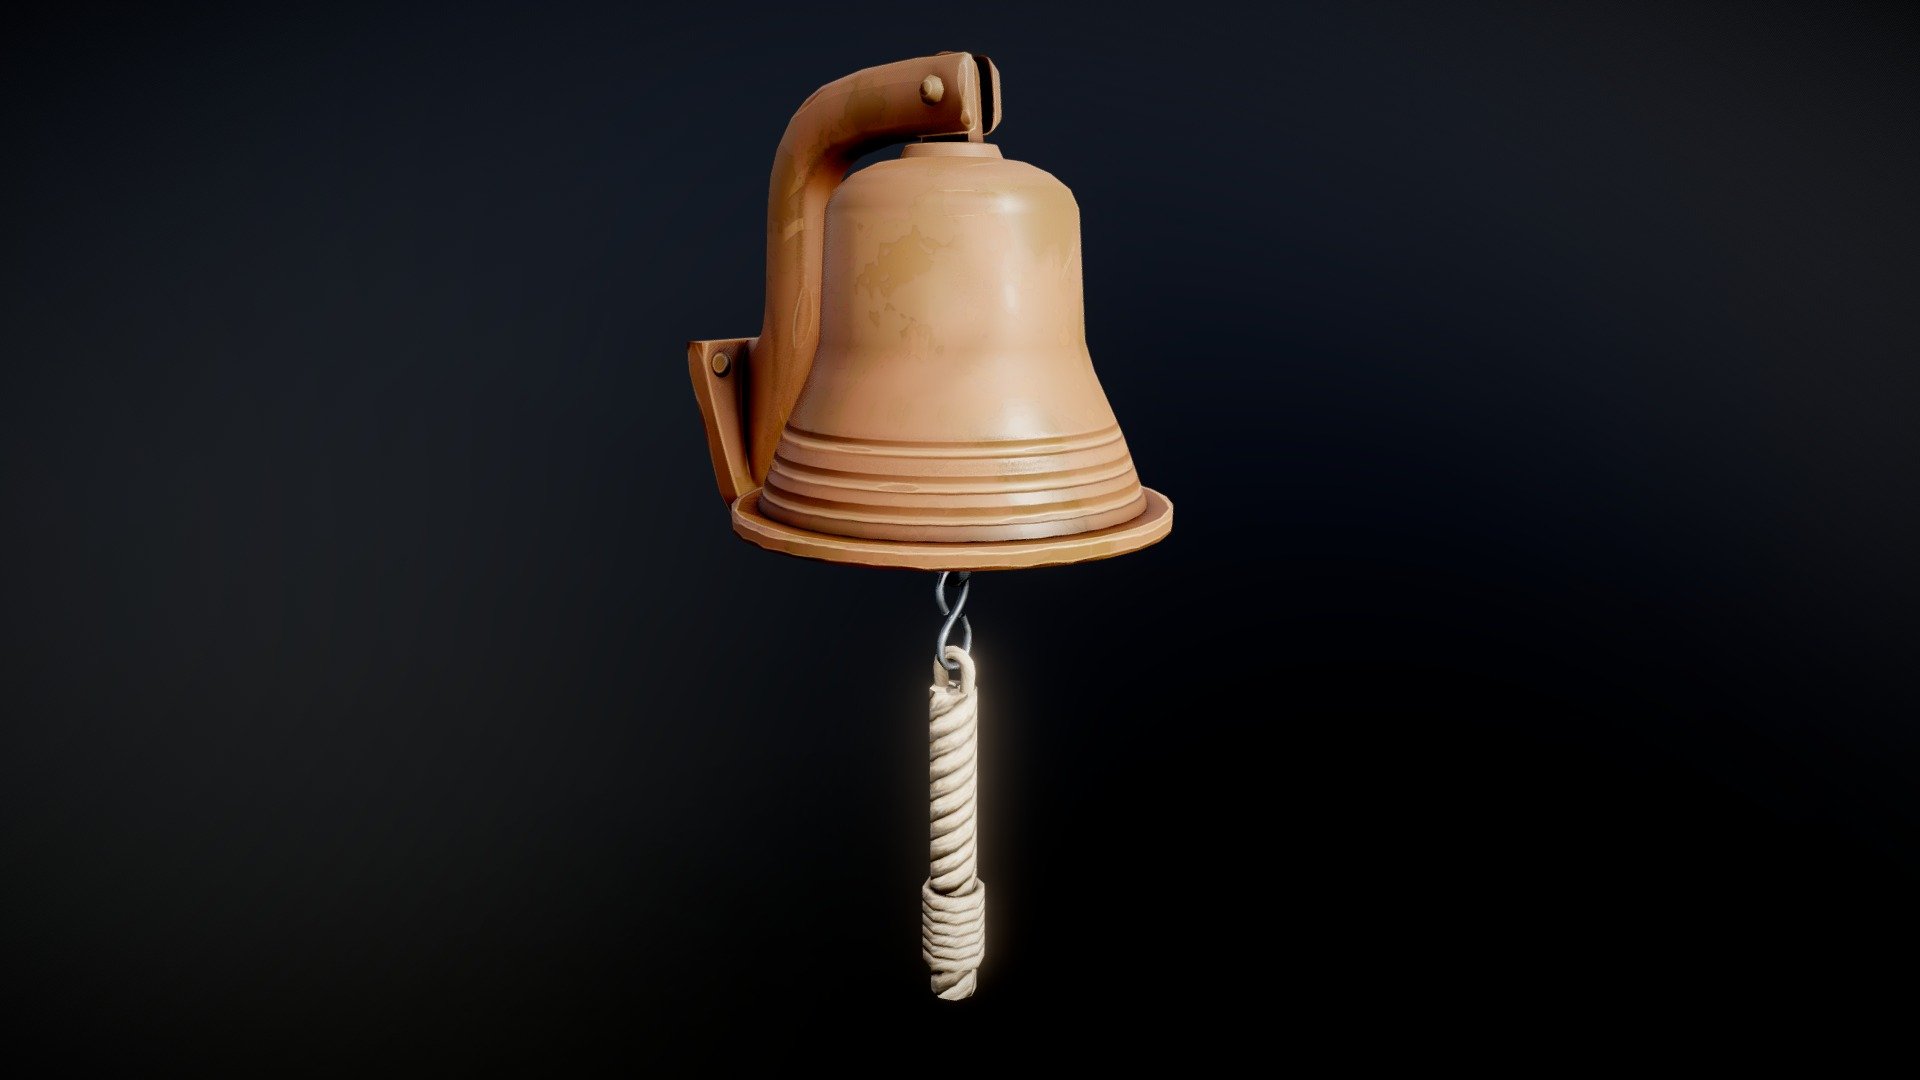 Stylized Ship's Bell with High Quality PBR Textures.


1974 Tris (1033 Vertices)
Blend, FBX, UnityPackages (2019.4, Built-In/URP/HDRP) formats. 
Materials and textures included. 
Metallic/Roughness PBR, Unity Built-In/URP/HDRP and UE4 Texture Sets 2048px PNG Textures.

Model by @Bek, Idea and Art Direction by Ivan Vostrikov 3d model